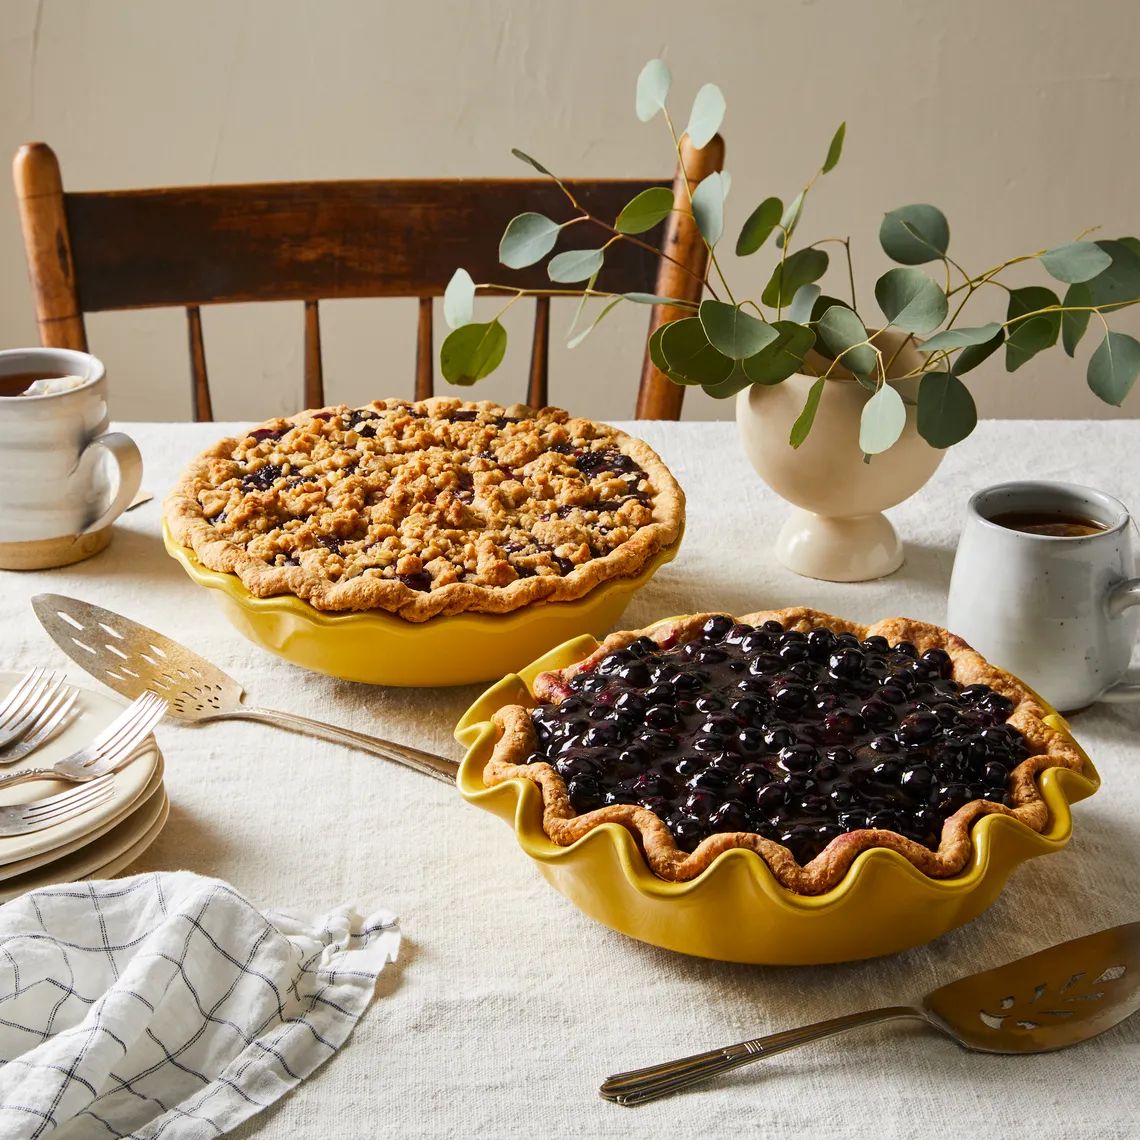 Emile Henry Classic French Ceramic Pie Dish | Food52